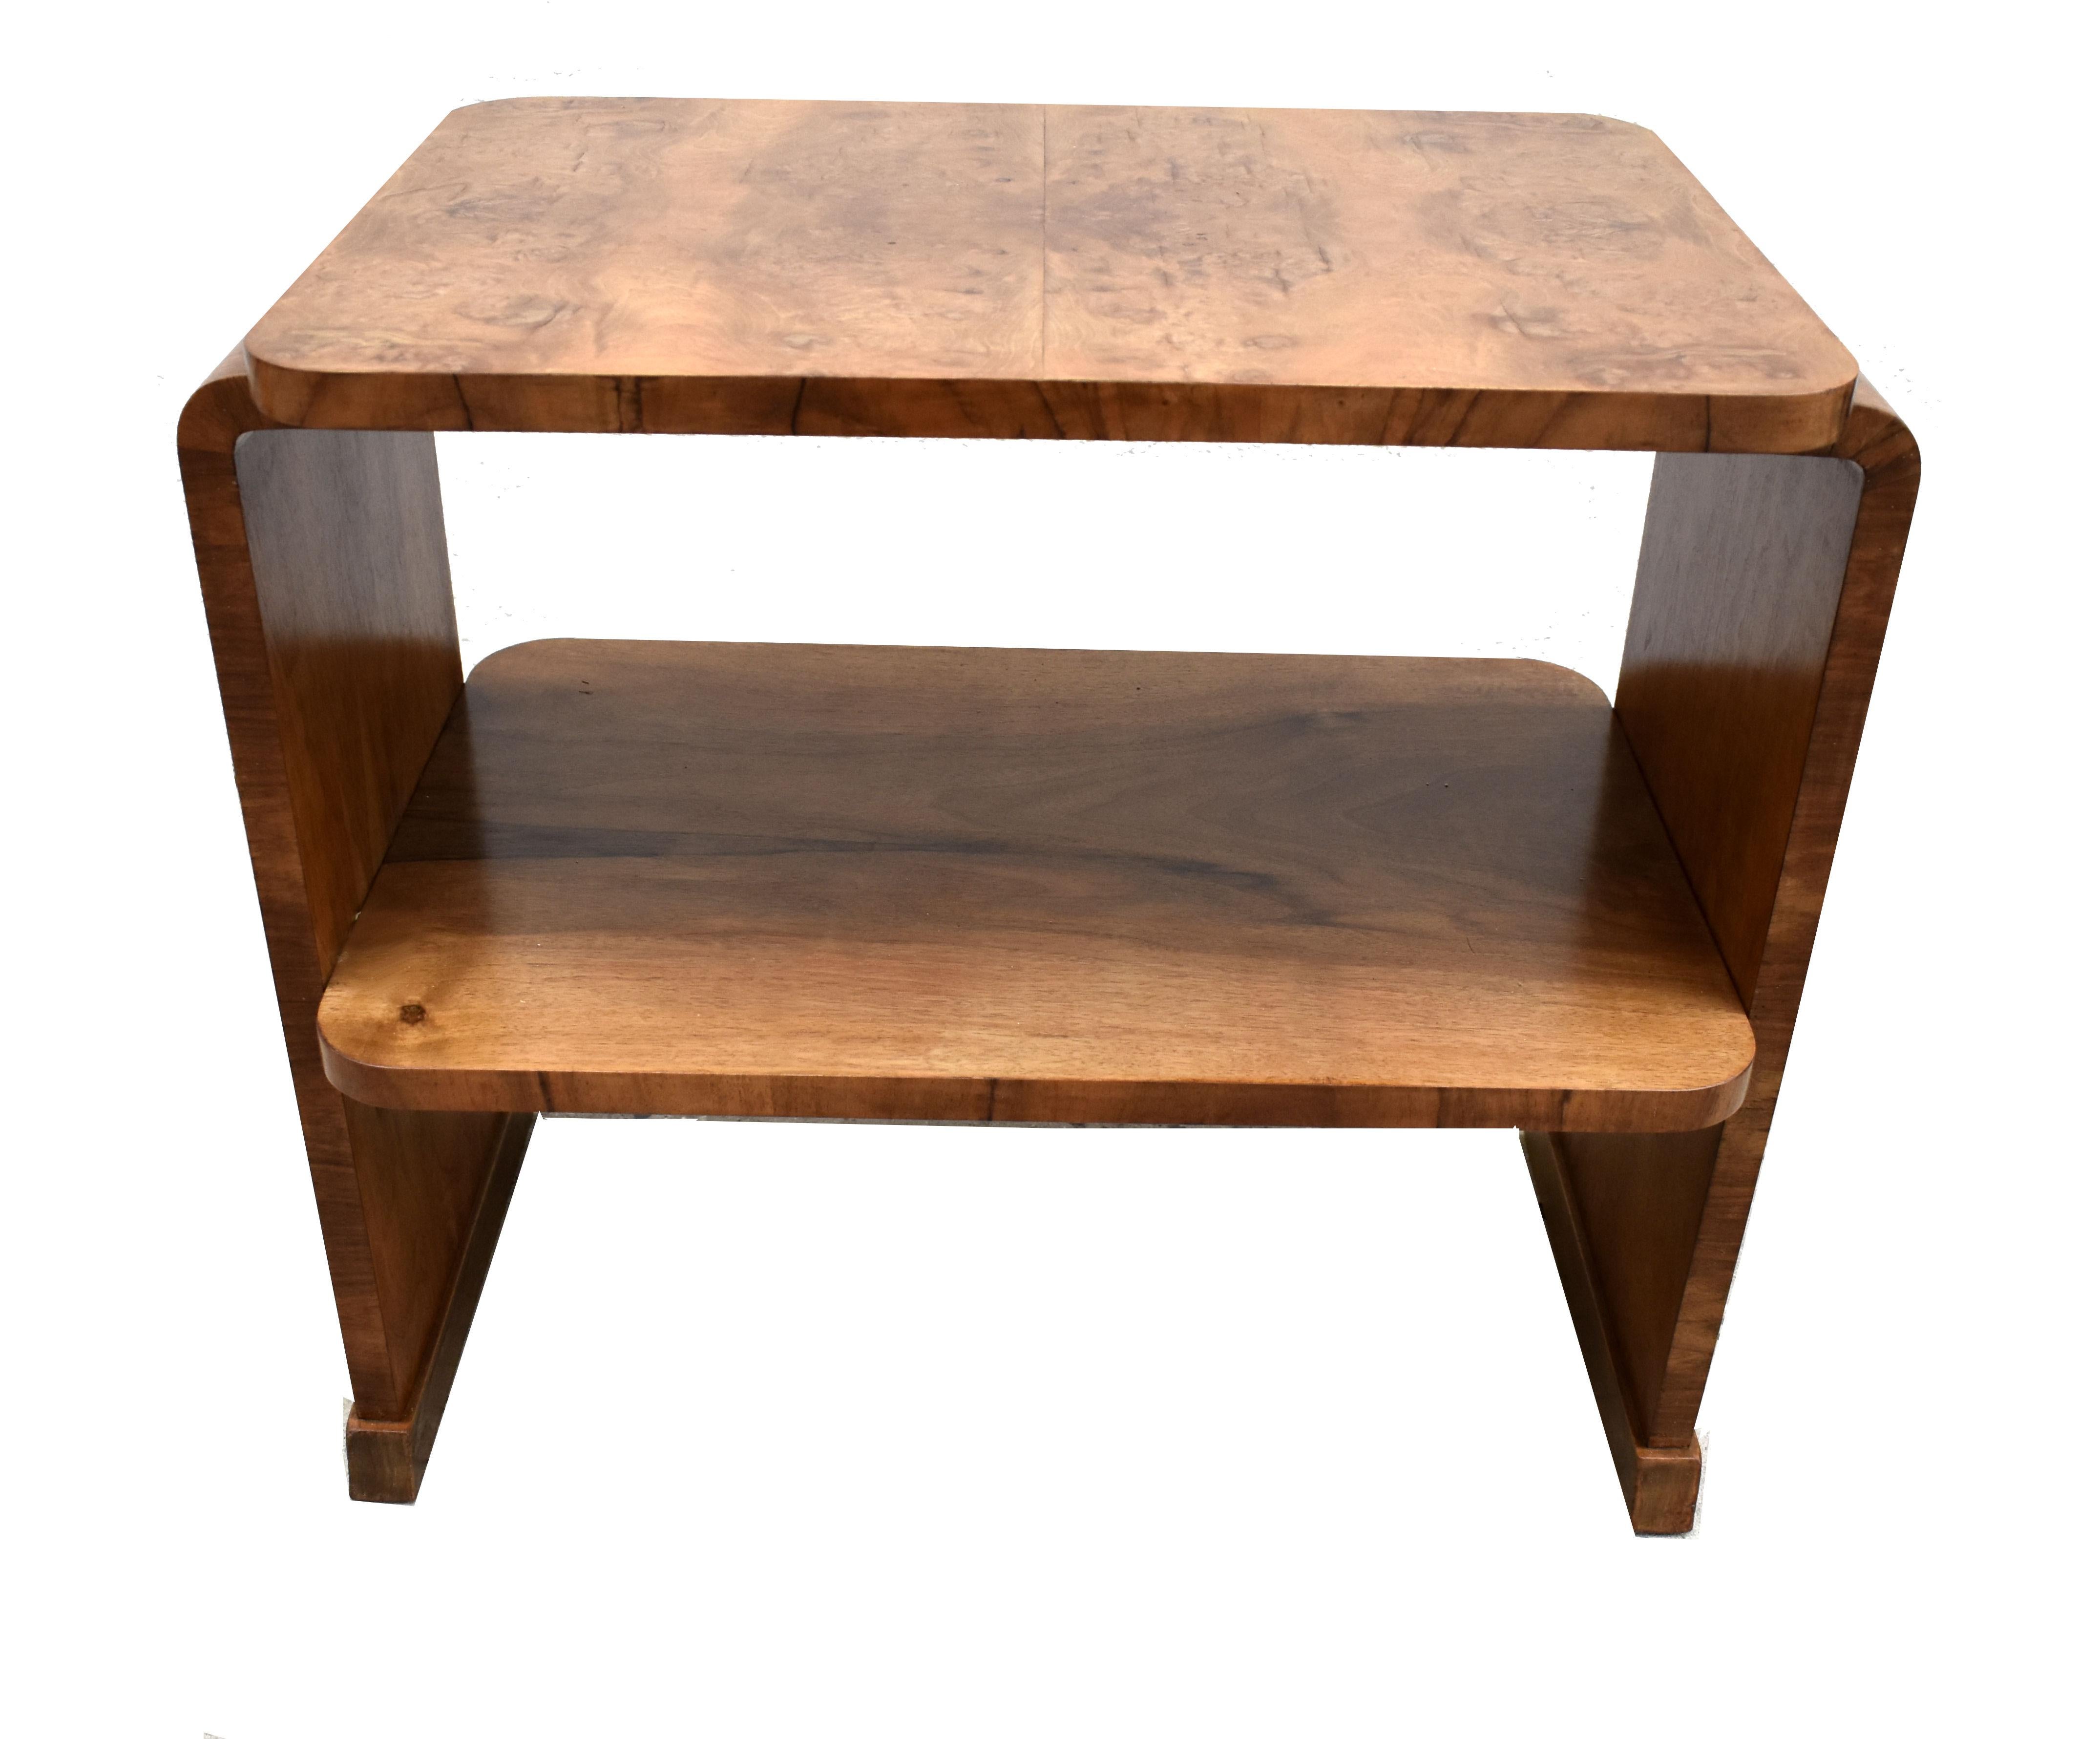 English Art Deco Large Modernist Two Tier Blonde Walnut Occasional Table, circa 1930 For Sale